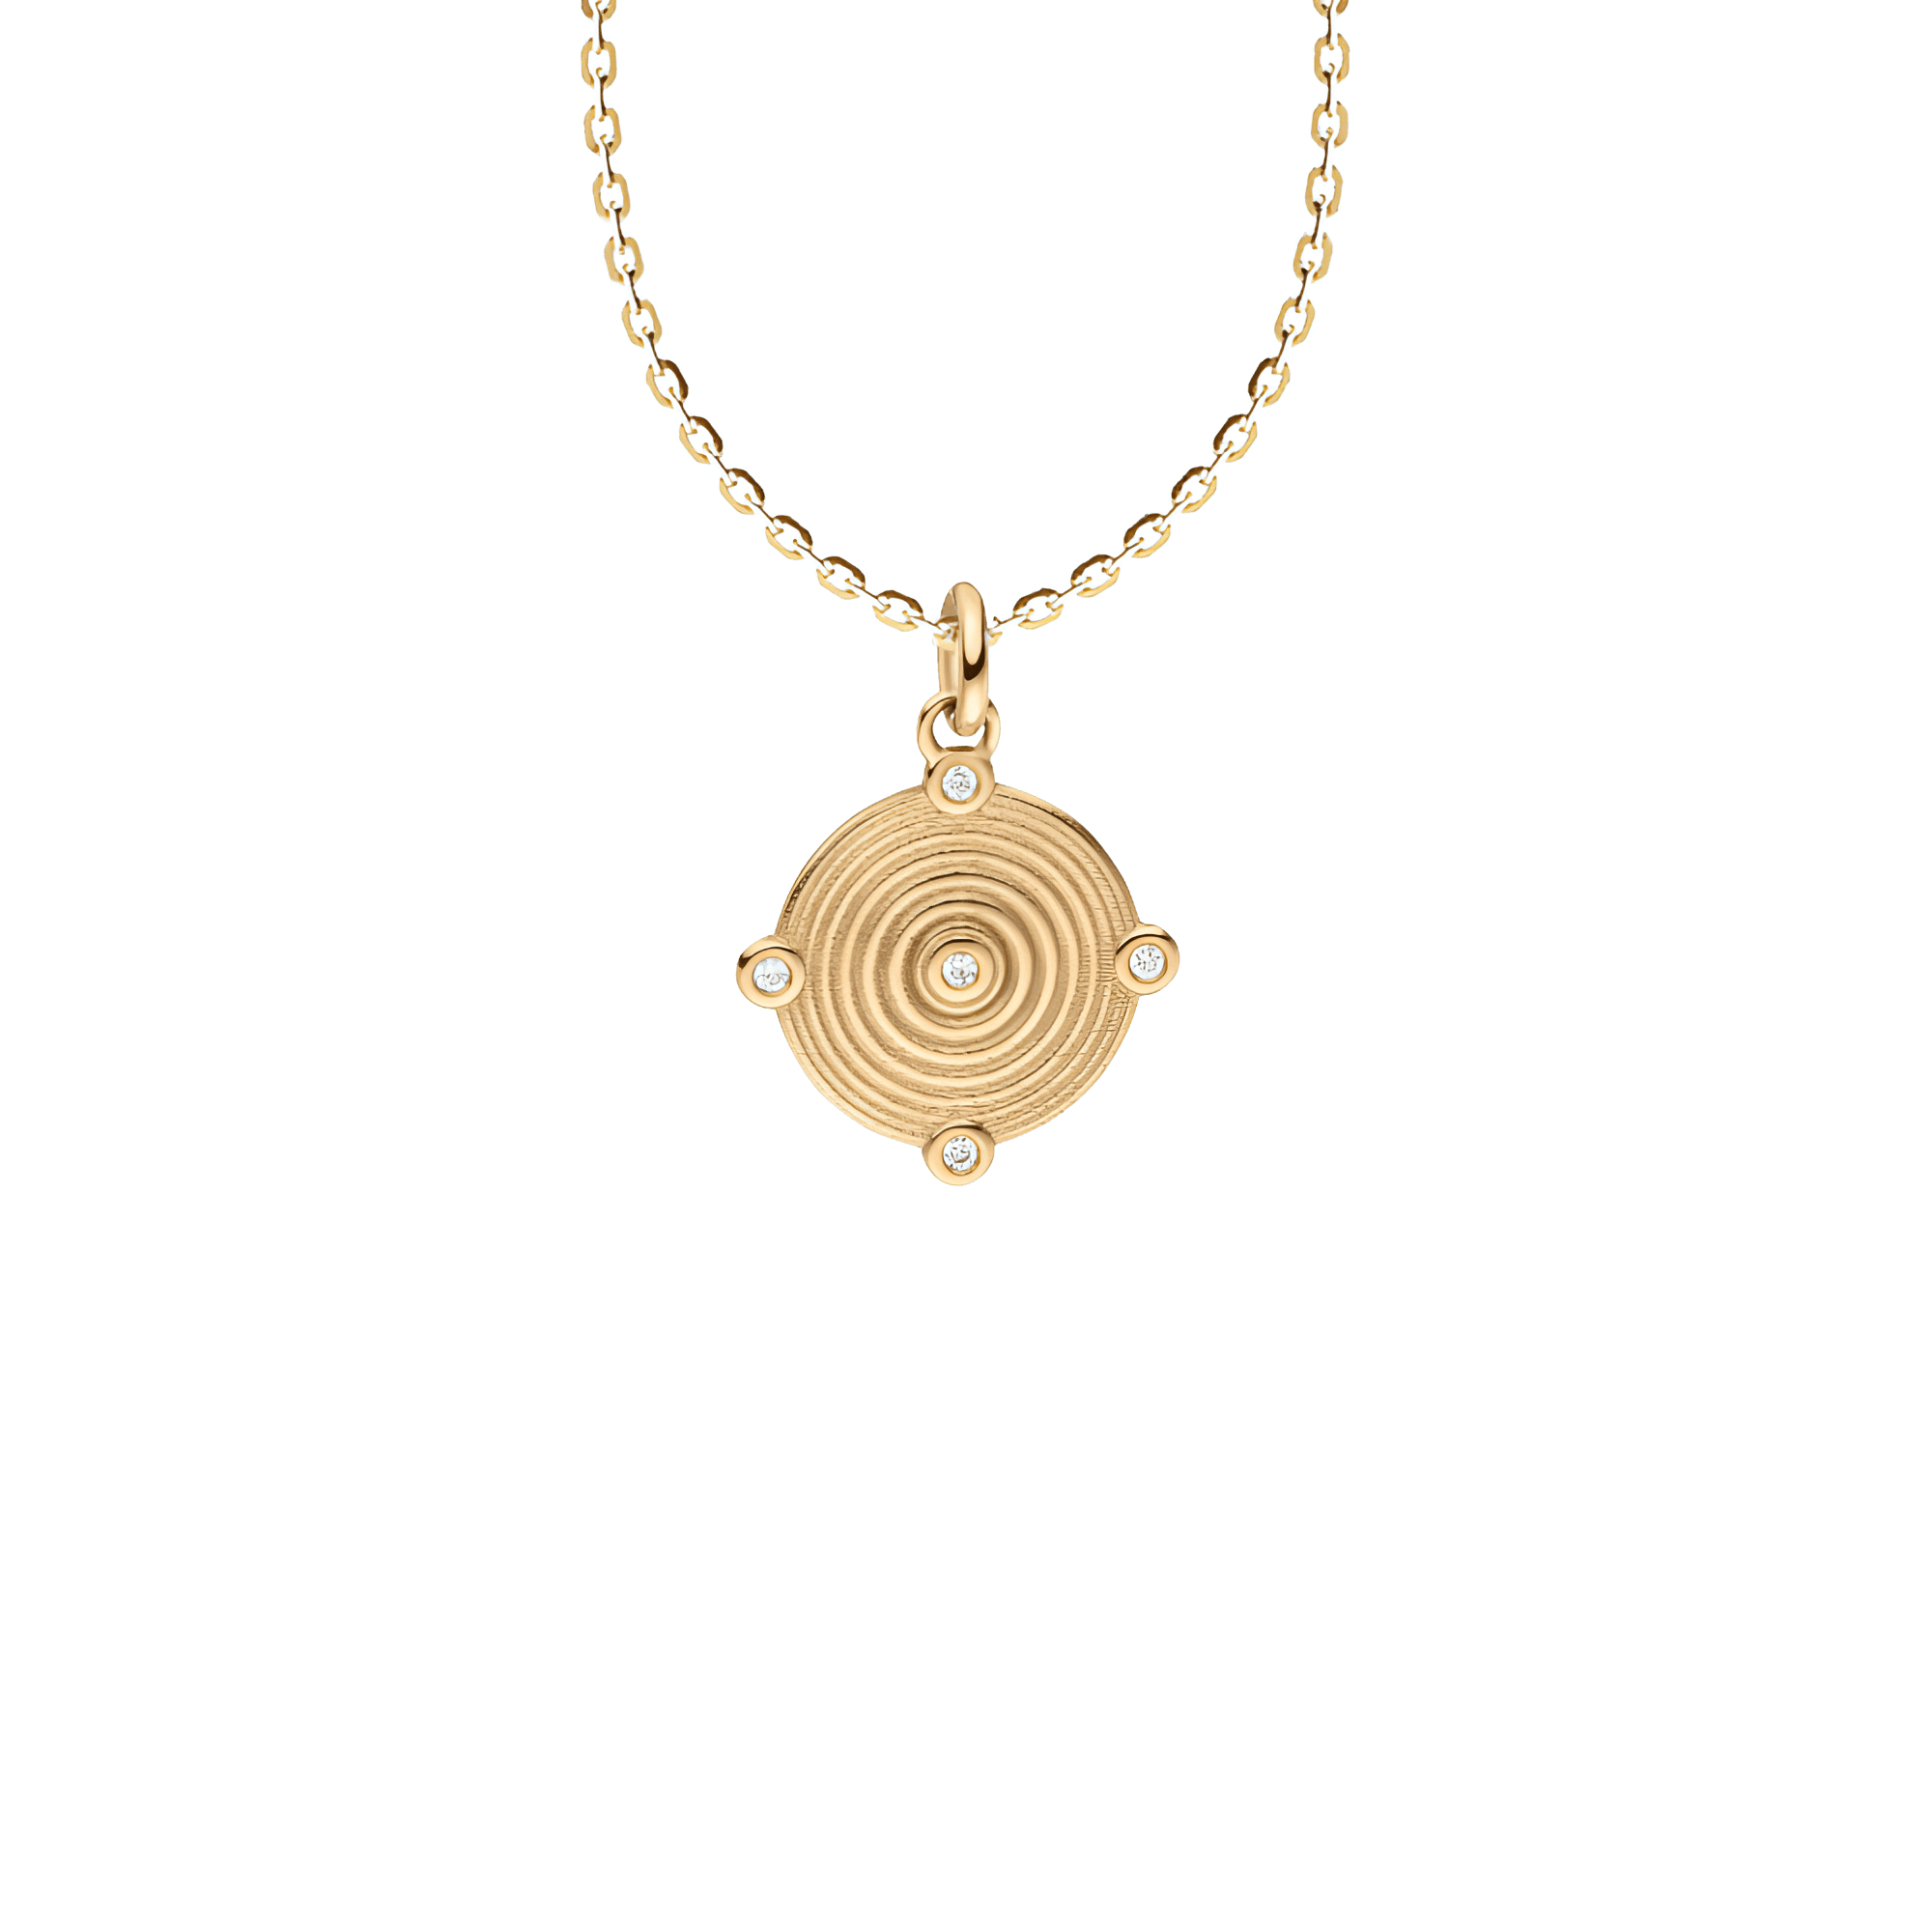 Memories of The Sea Pendant Necklace | 18K yellow gold / Chain length 420mm/16.5in  | Jewelry | The Future Rocks